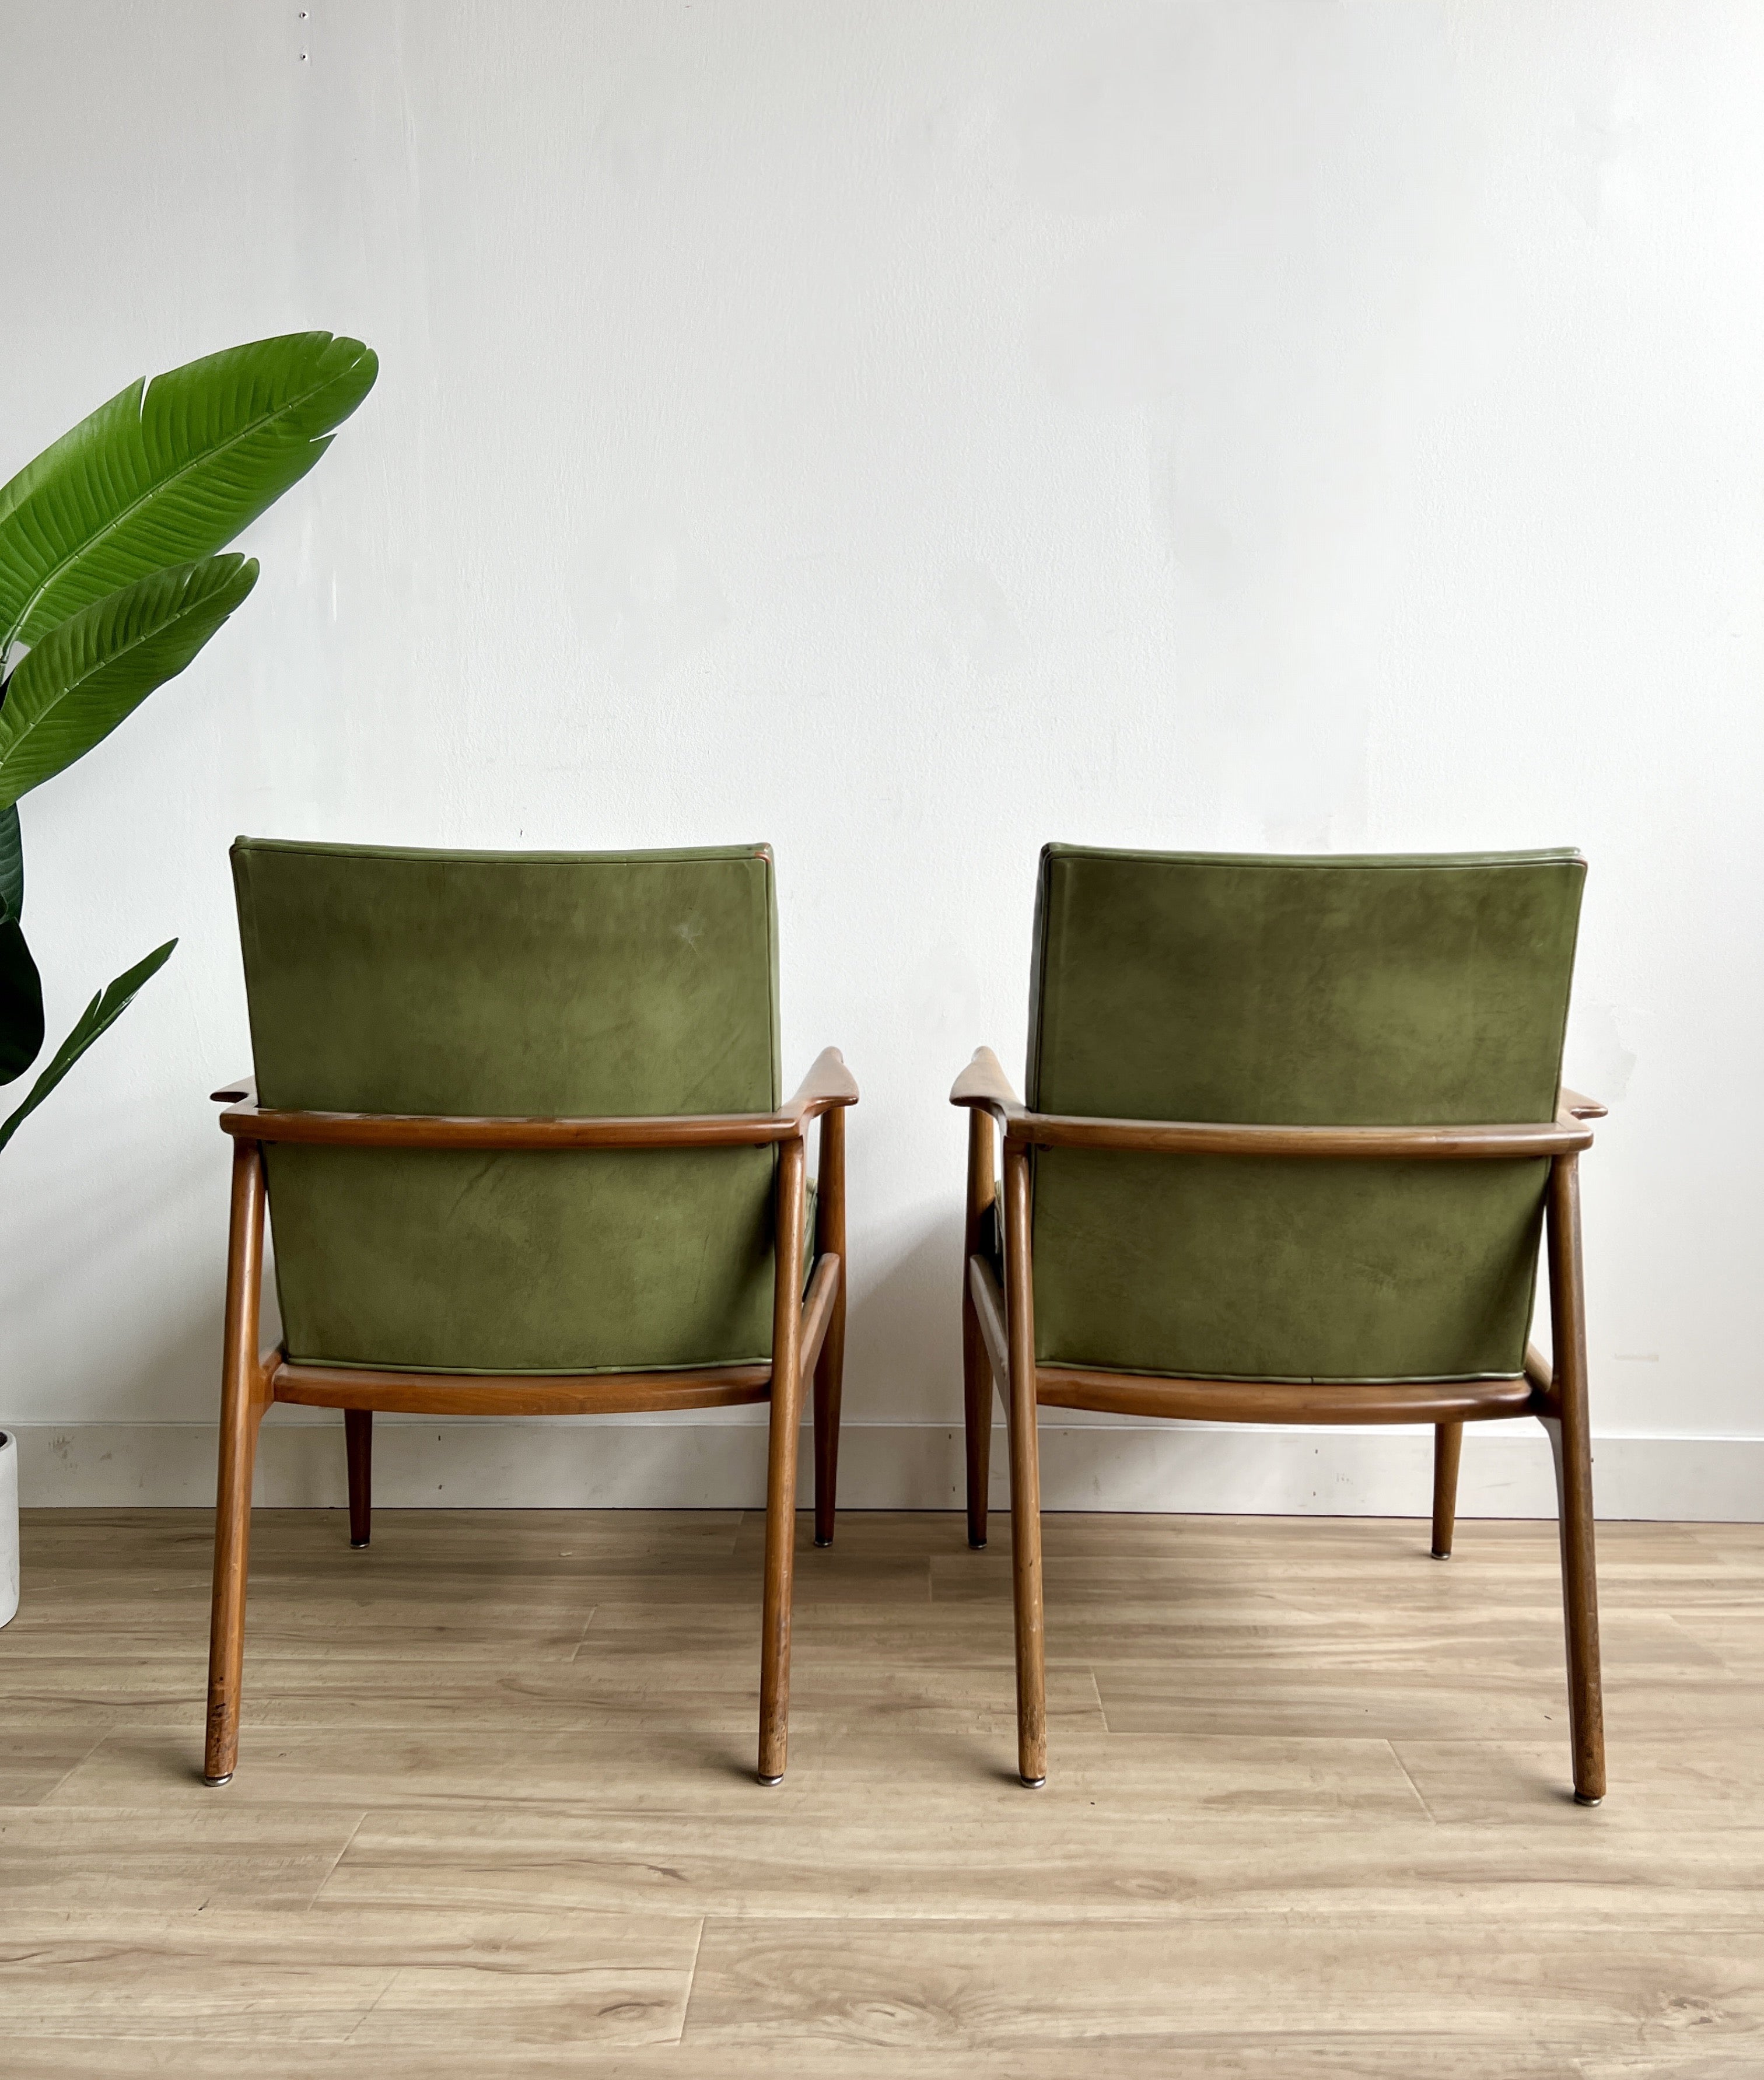 Mid Century Arm Chairs in leather by Stow & Davis